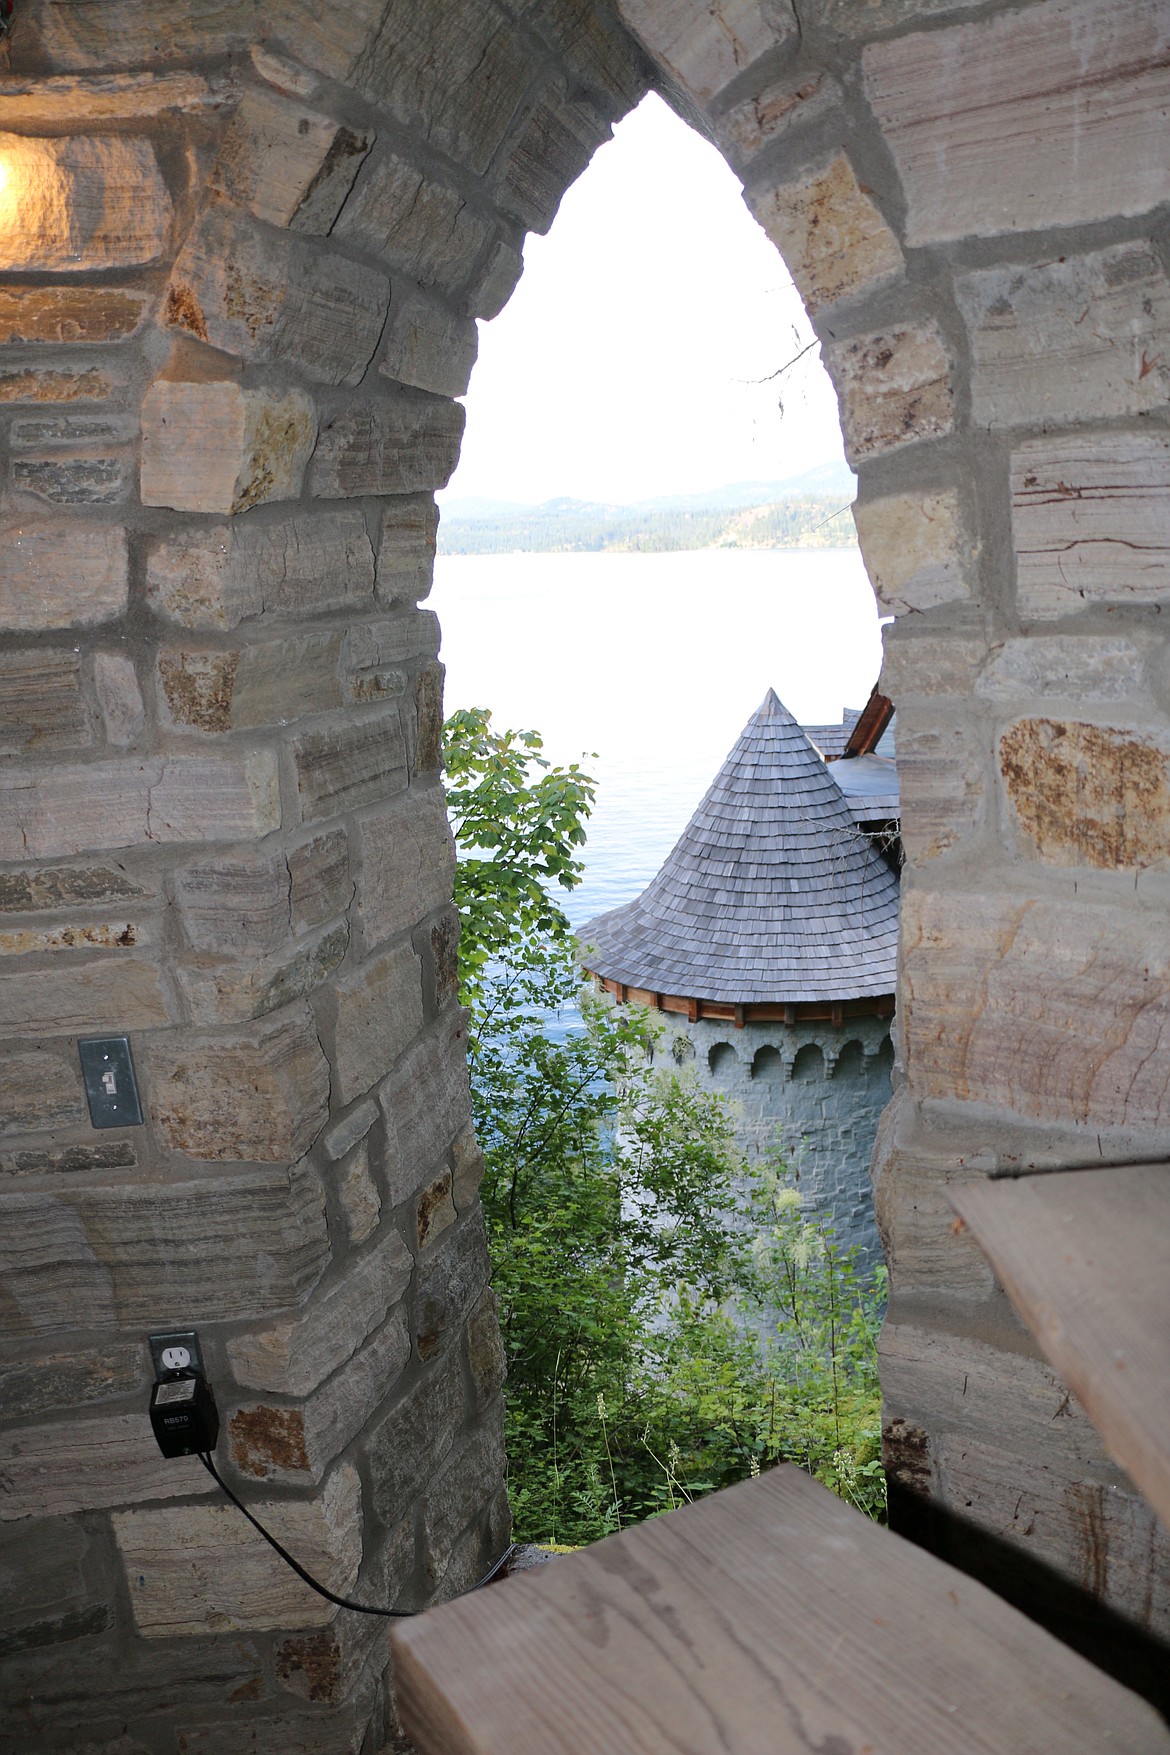 Castle Von Frandsen can be seen through an arched window of a tower built by the History Channel for the current owner of the castle, Kris Frandsen.